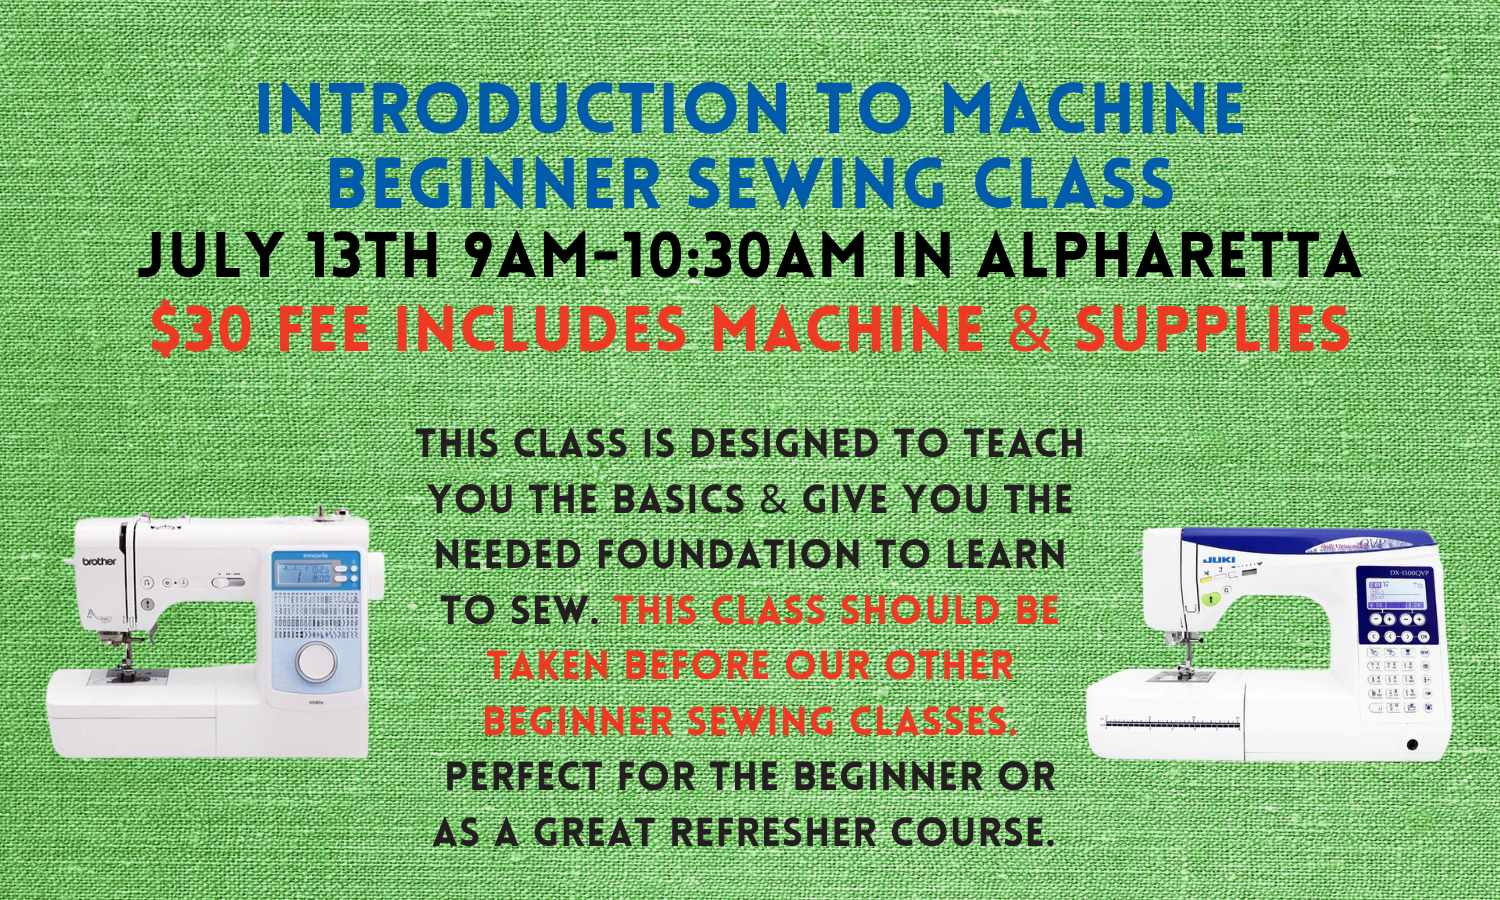 Introduction to Machine Beginner Sewing Class 7/13